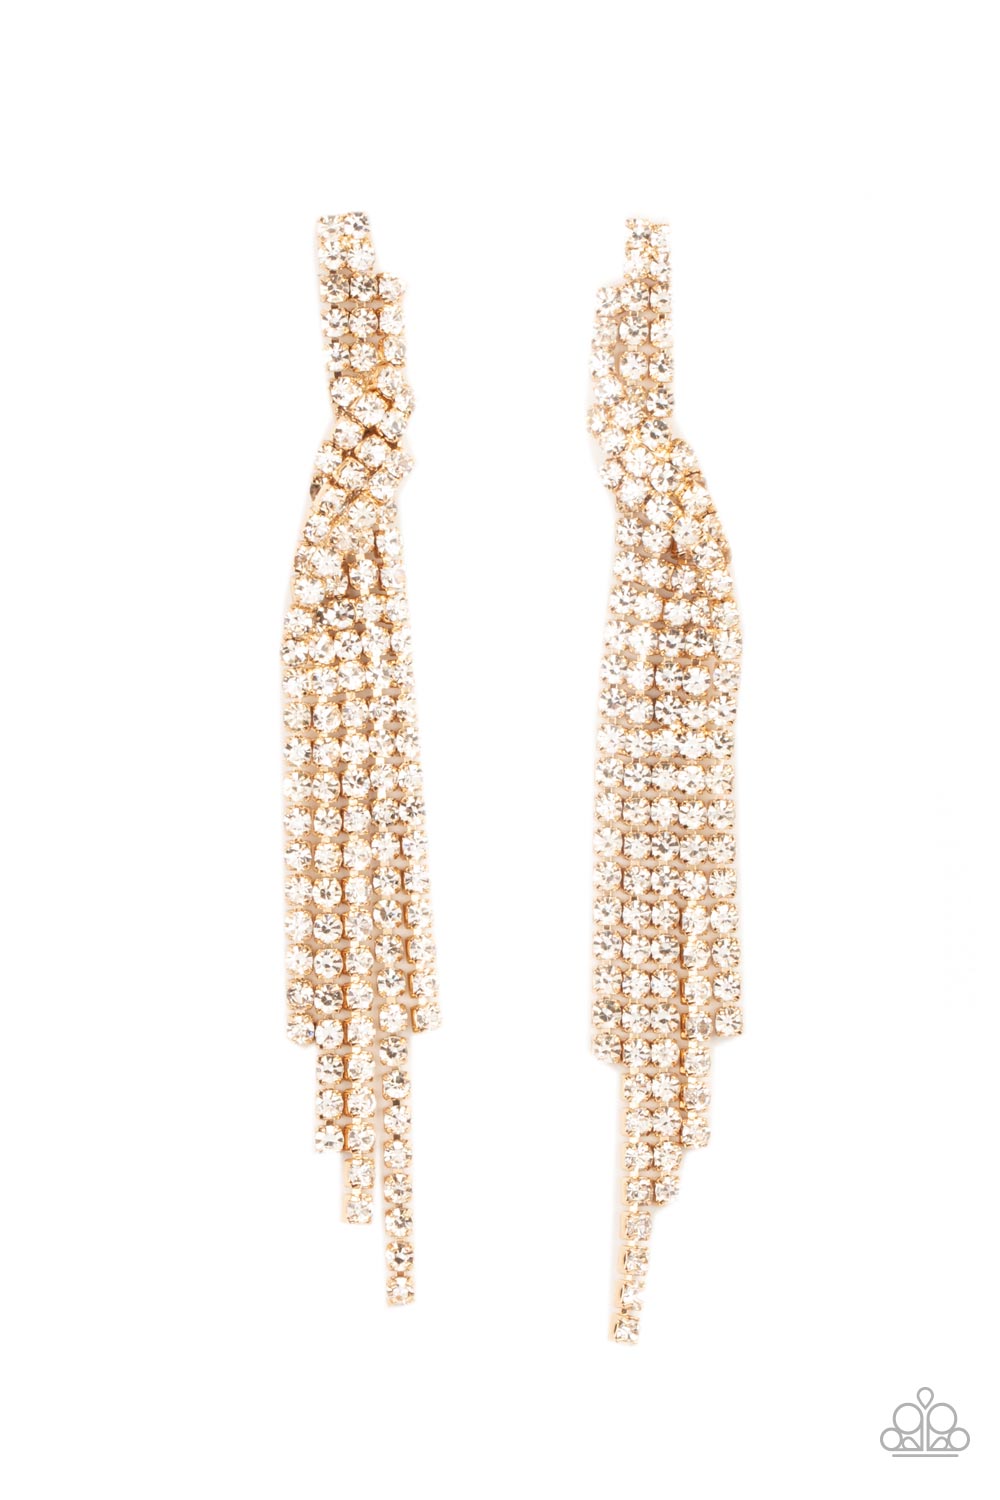 Cosmic Candescence - Gold Earrings - Paparazzi Accessories 